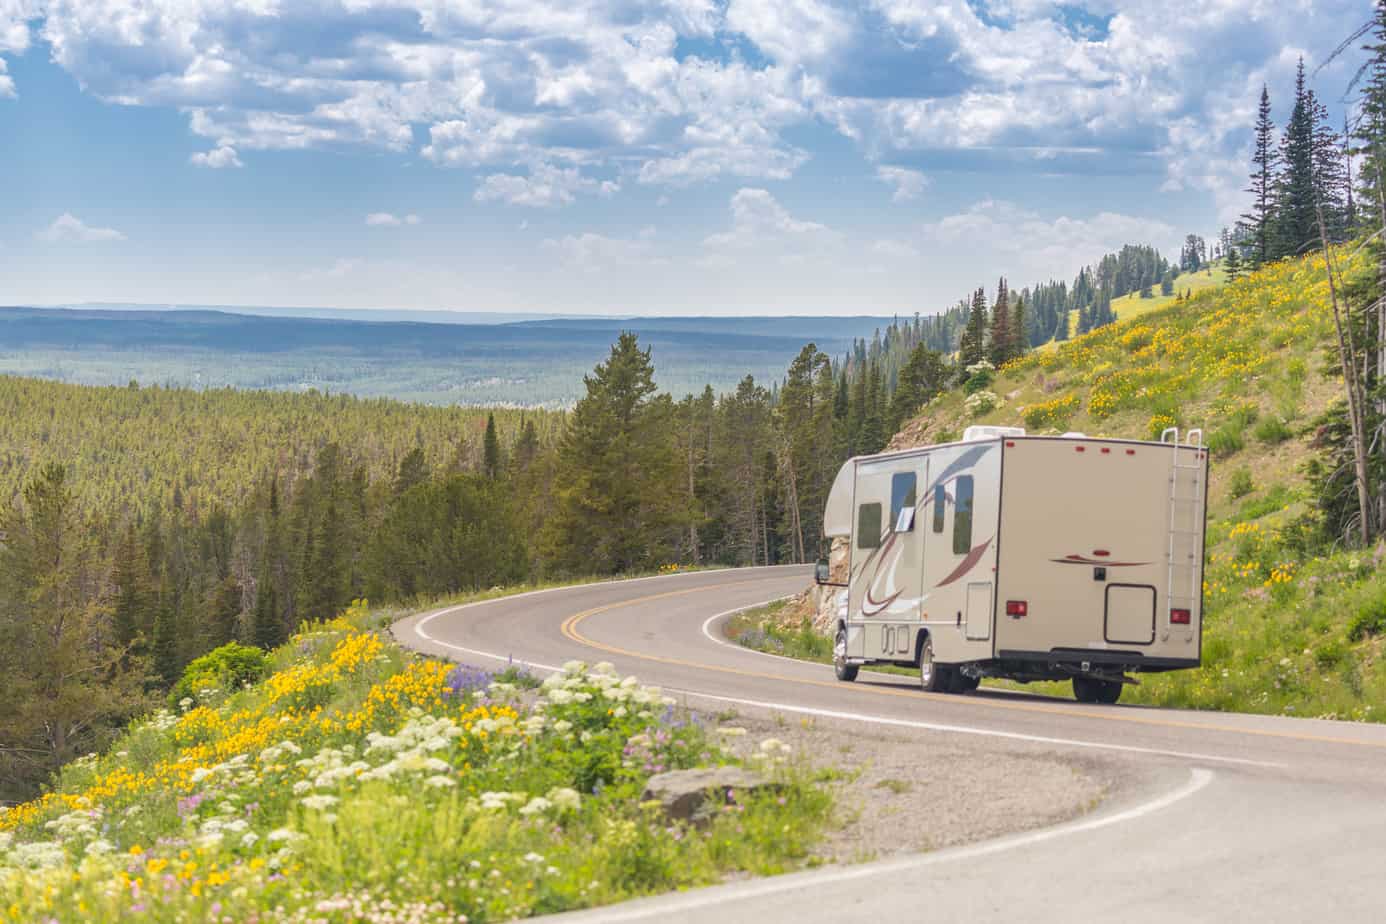 A camper drives on a winding road surrounded by greenery.